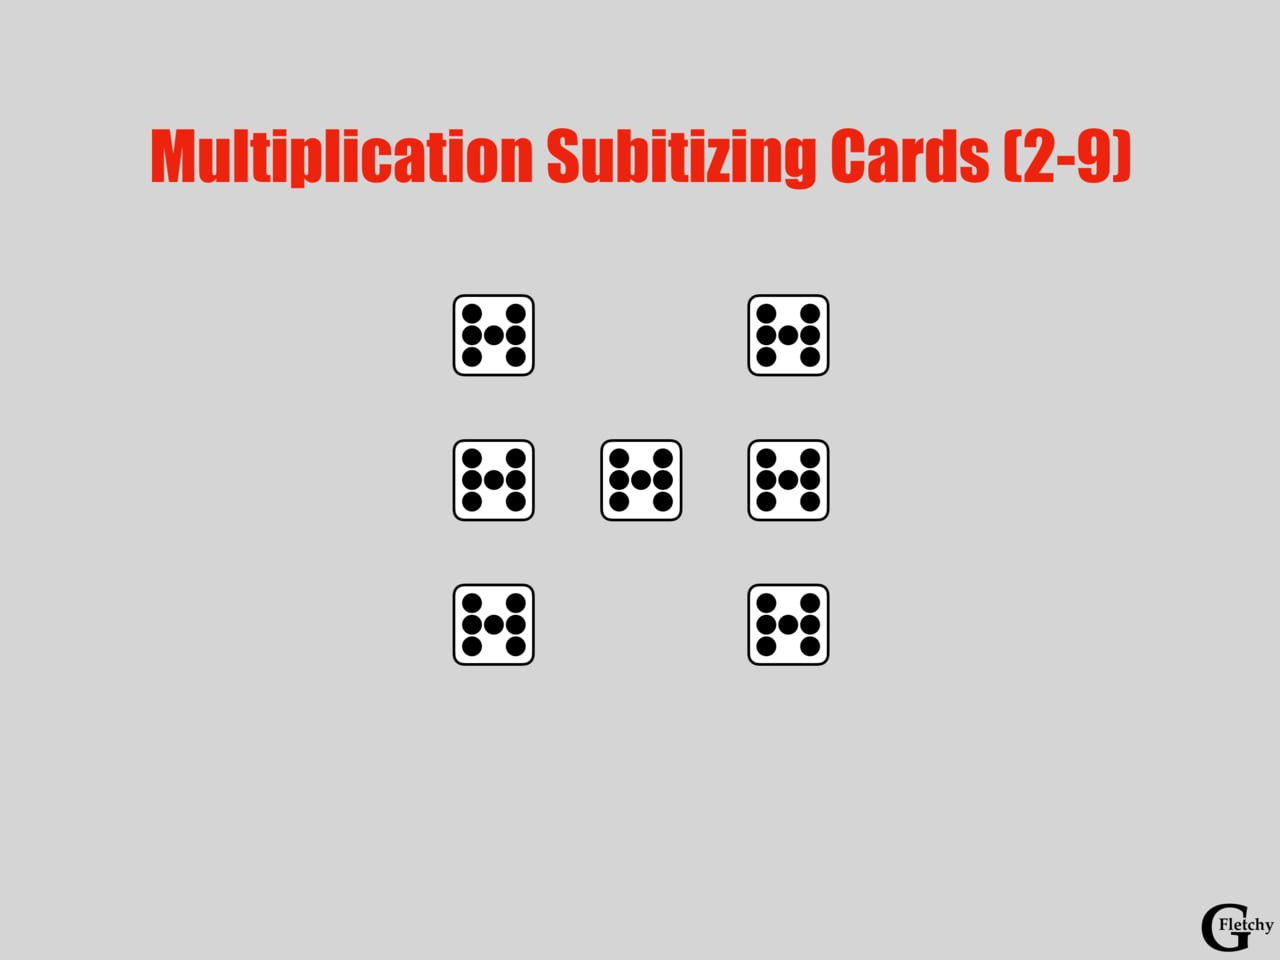 Multiplication Subitizing Cards: An Upgrade To Building